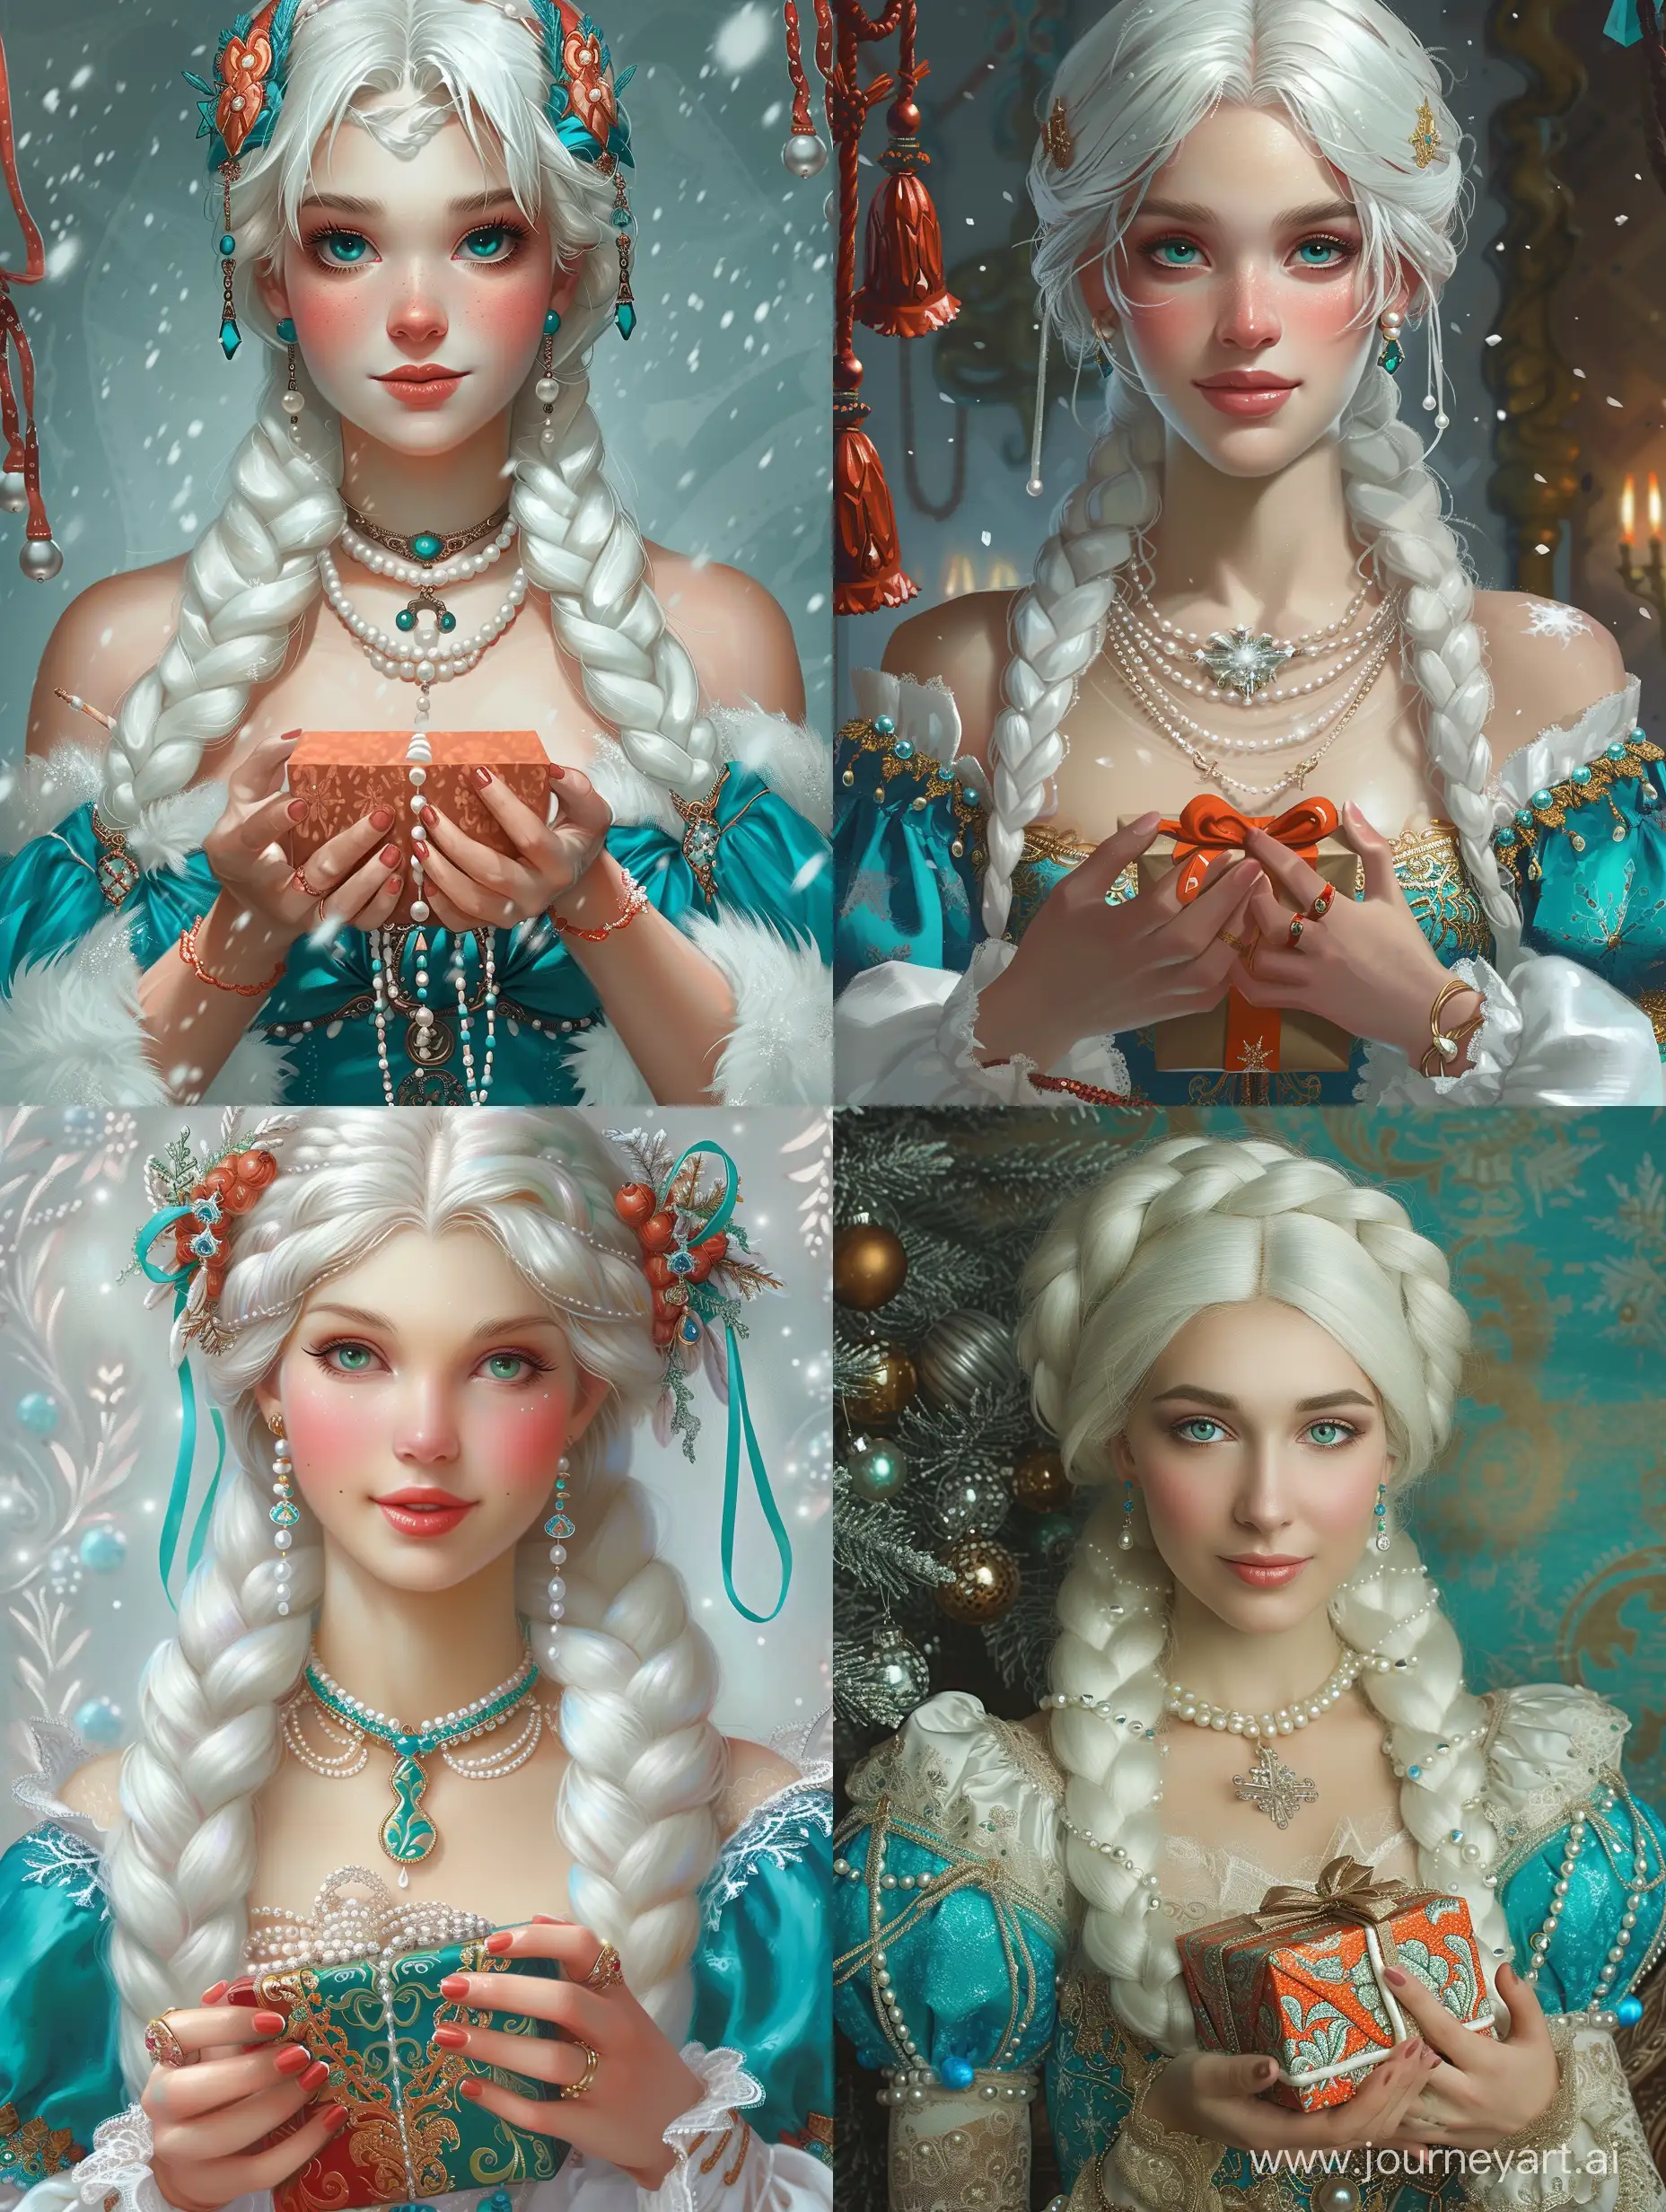 Snow-Maiden-Holding-a-Gift-Beautiful-White-Braids-and-Pearls-in-Blue-and-Turquoise-Costumes